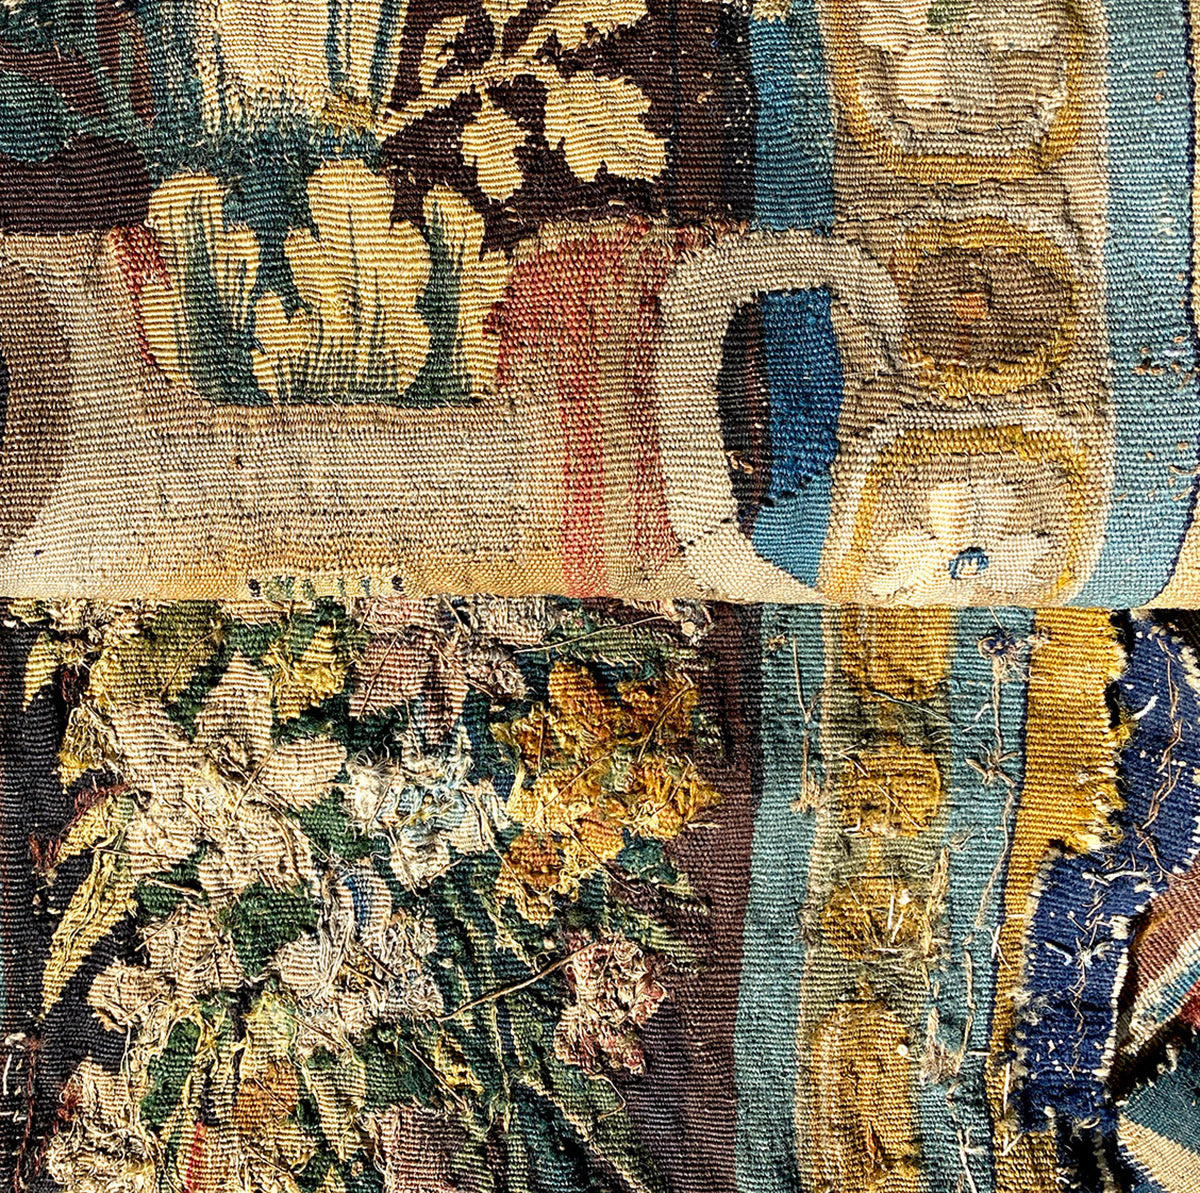 Pair Large Fine Antique Flemish Verdure Tapestry Panels, Frame or Make into Throw Pillows (2)